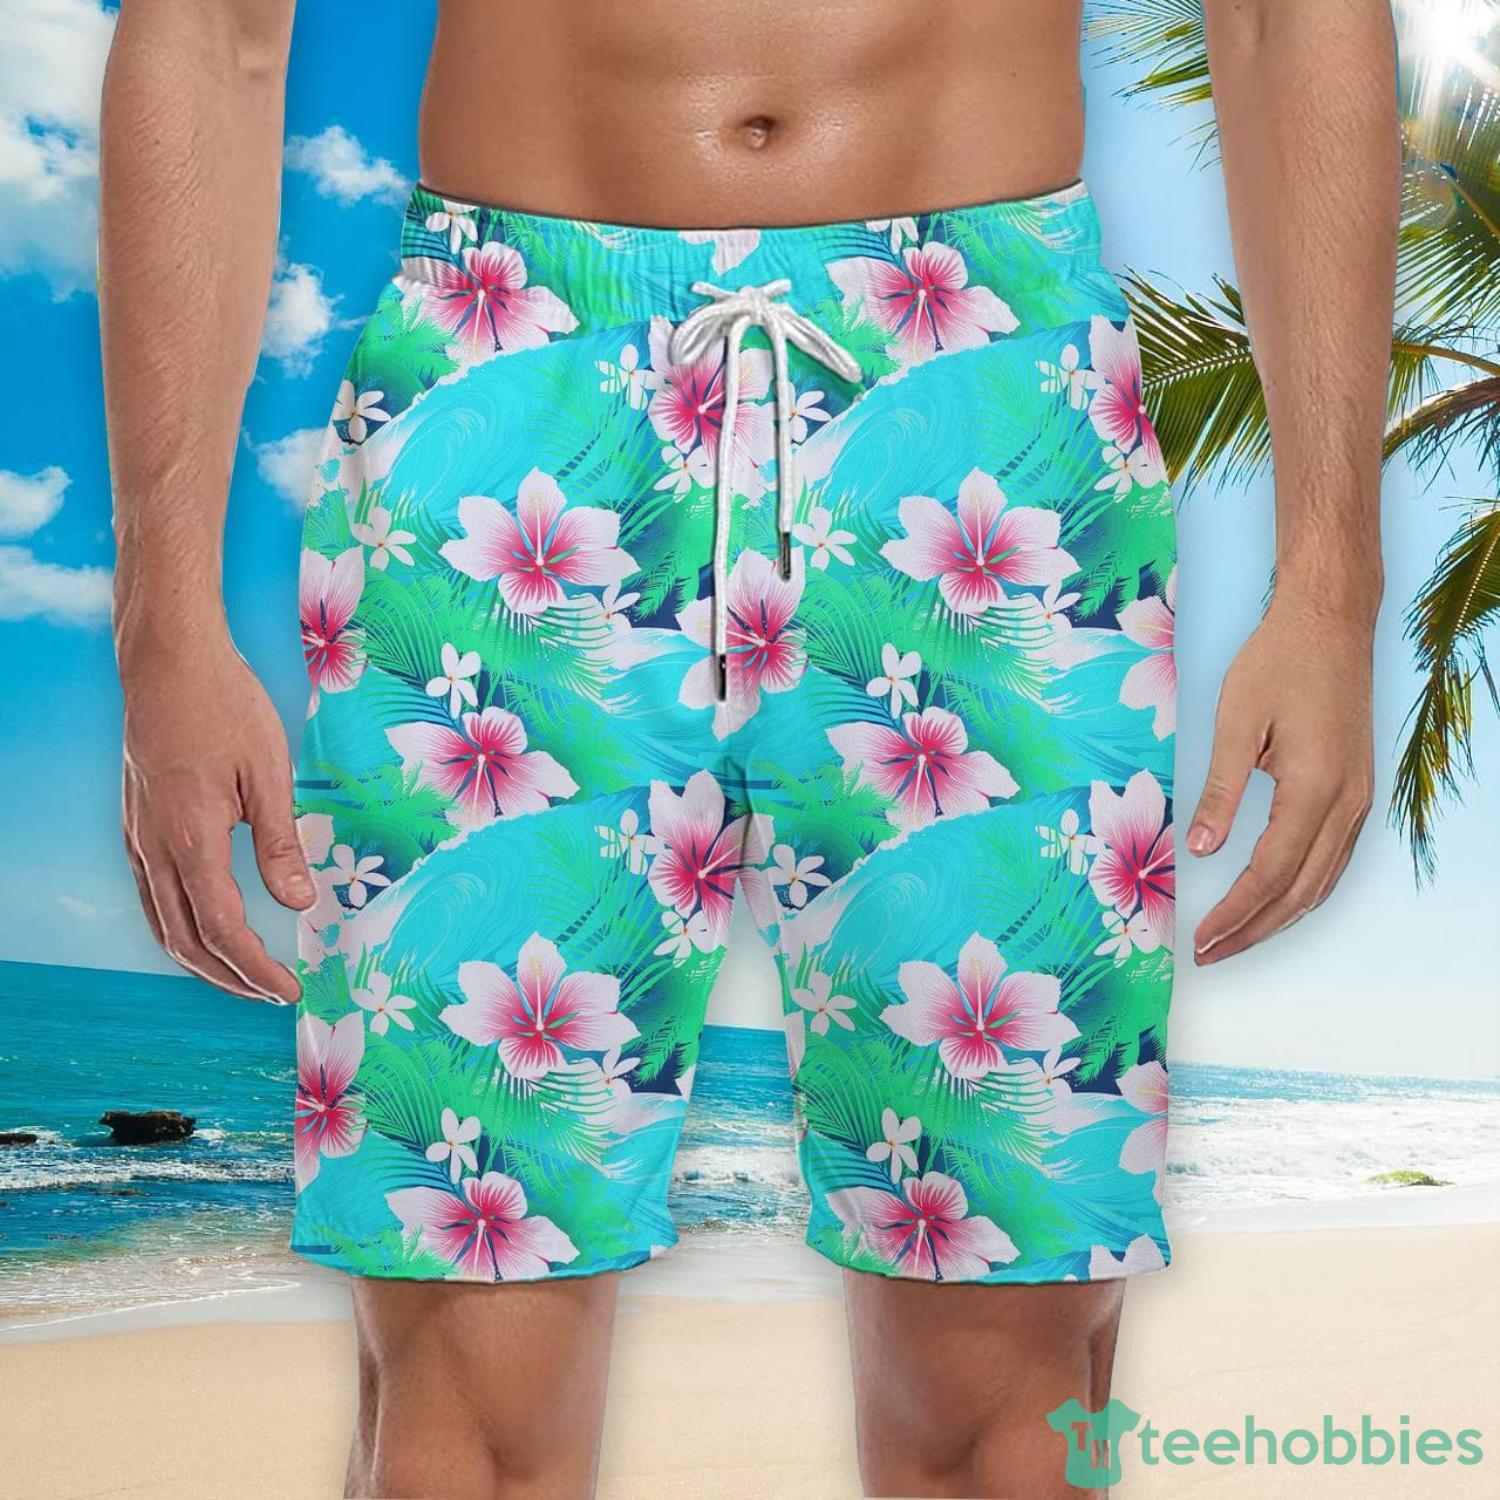 Custom Men's Boxers - Embrace Tropical Chic with Hibiscus and Leaves Design